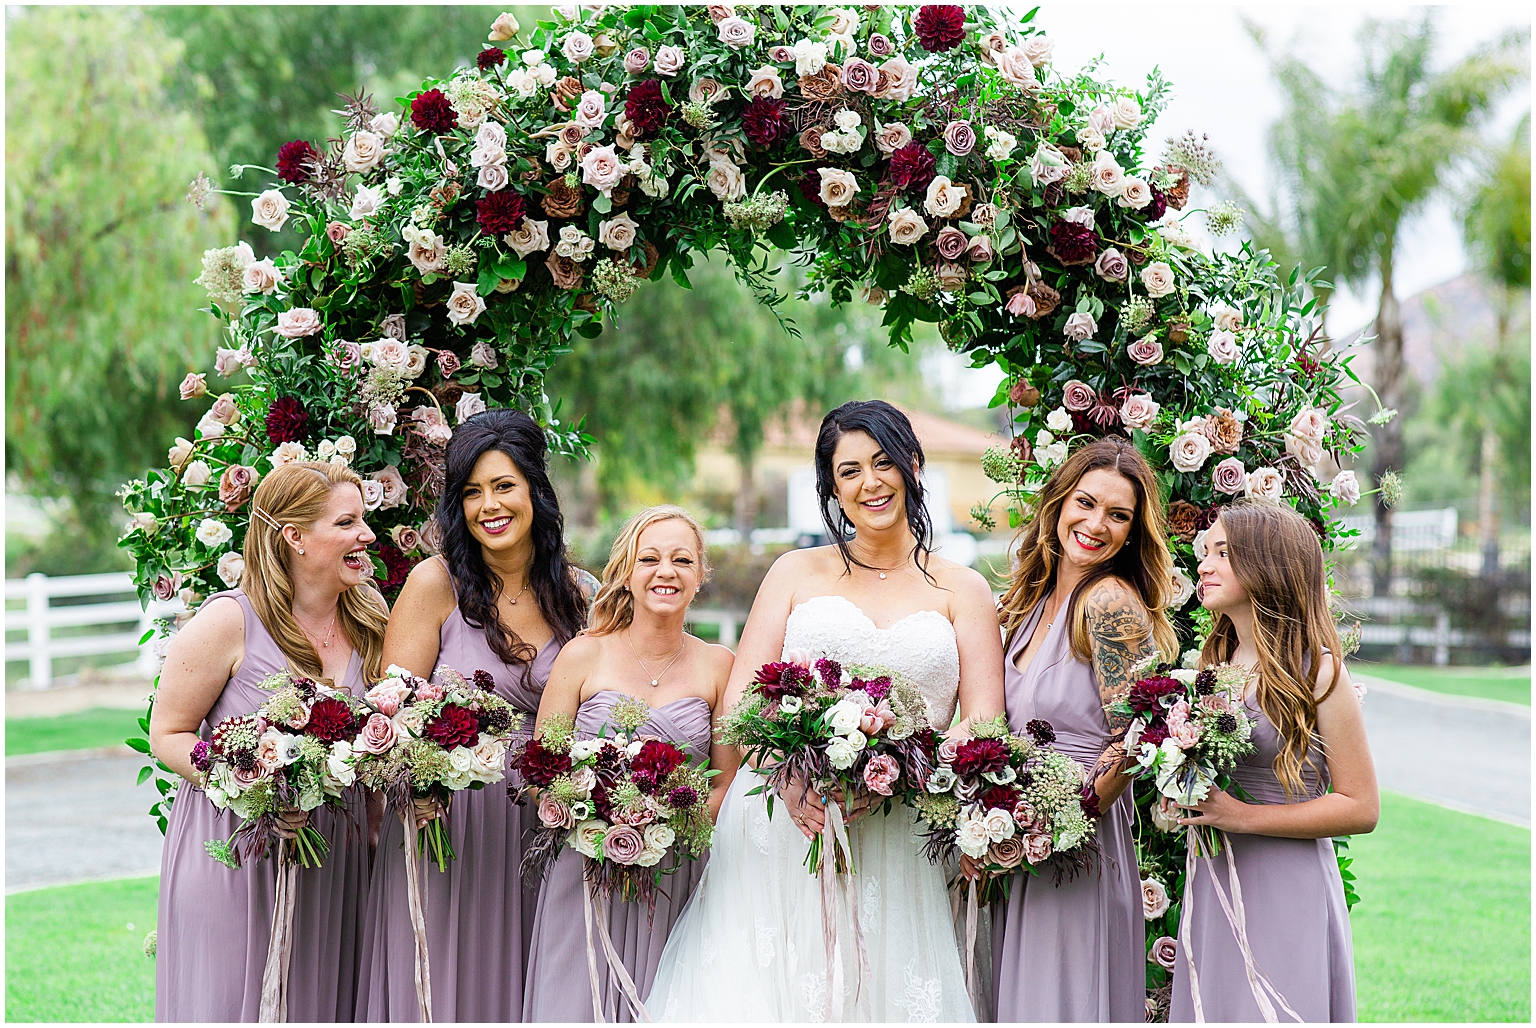 Bride and Bridesmaids together under a beautiful floral arch designed by Little Hill Designs